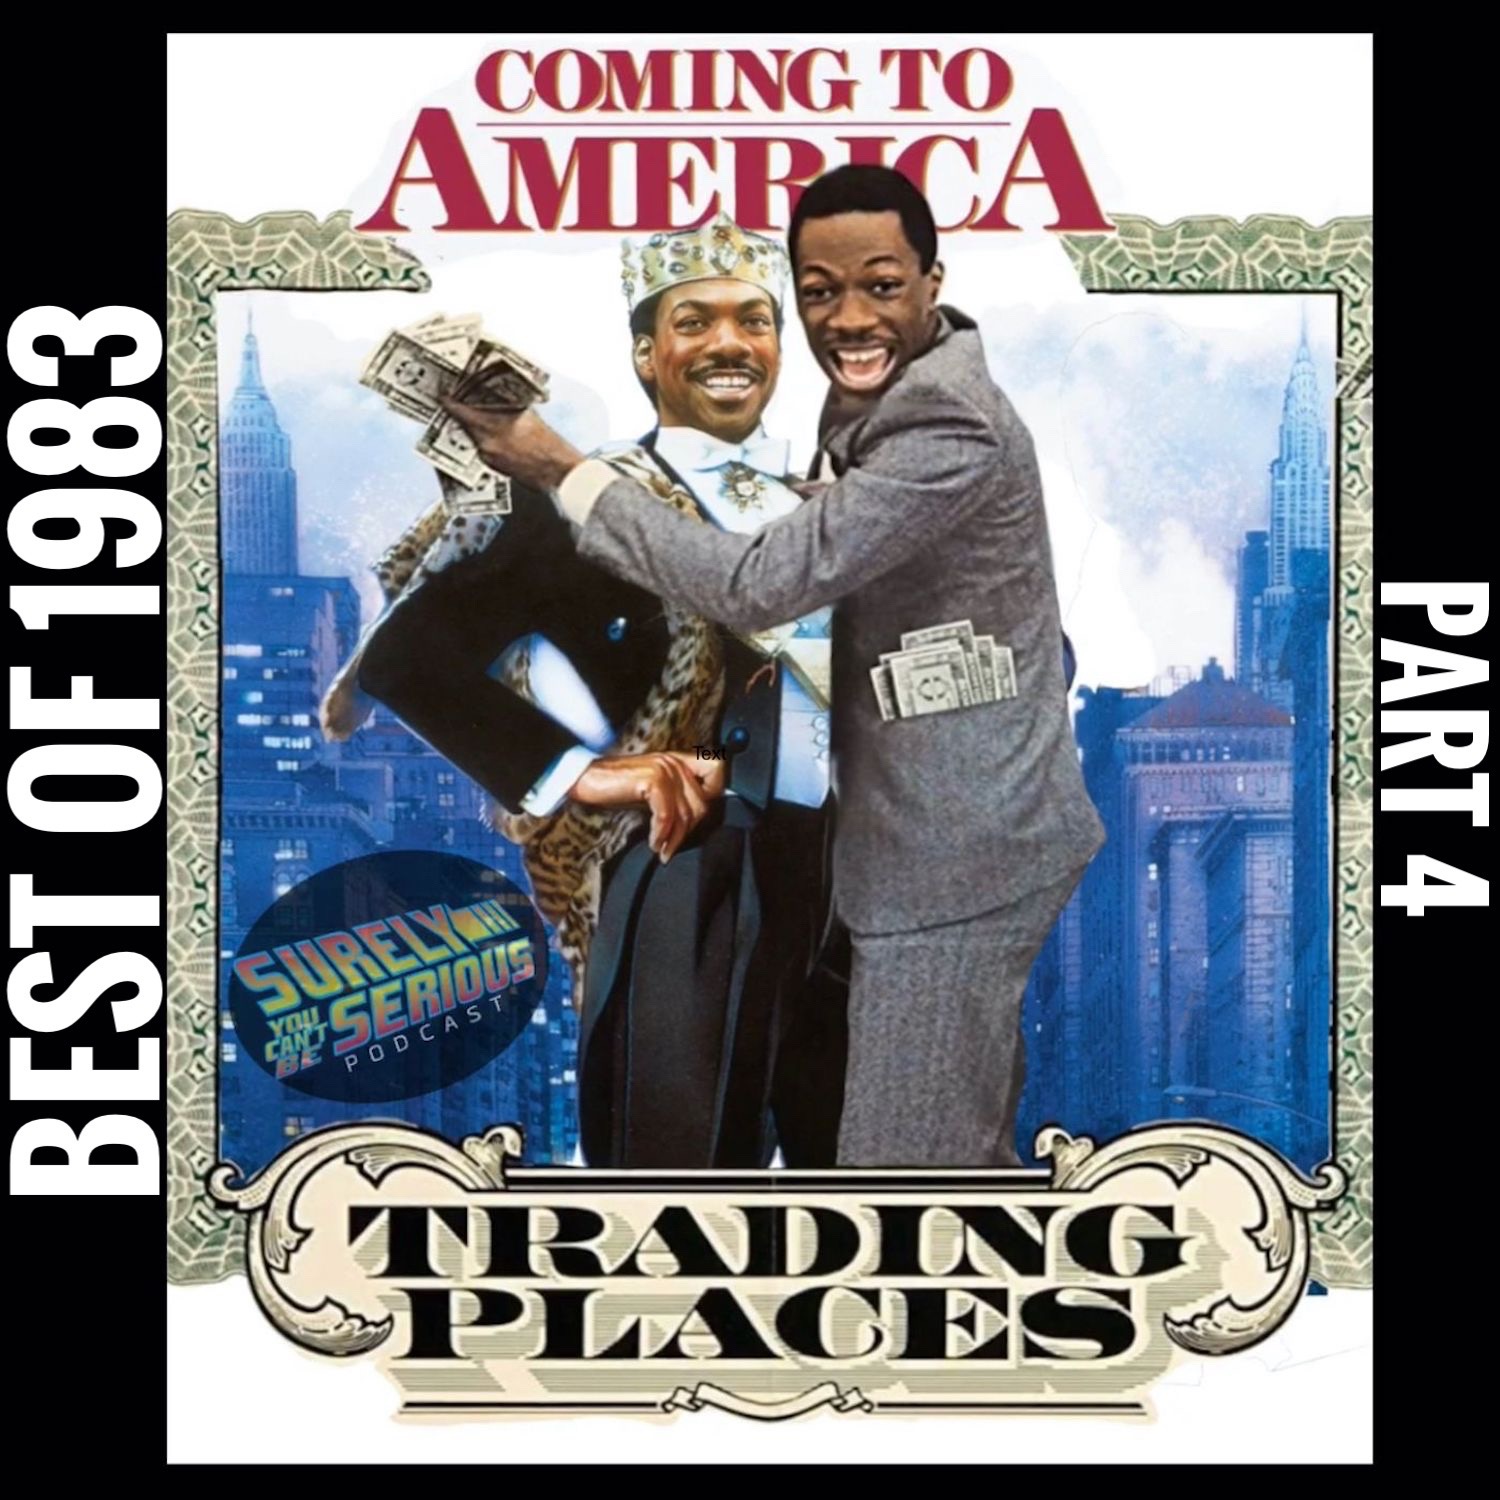 Trading Places (1983) vs. Coming to America (1988) Image